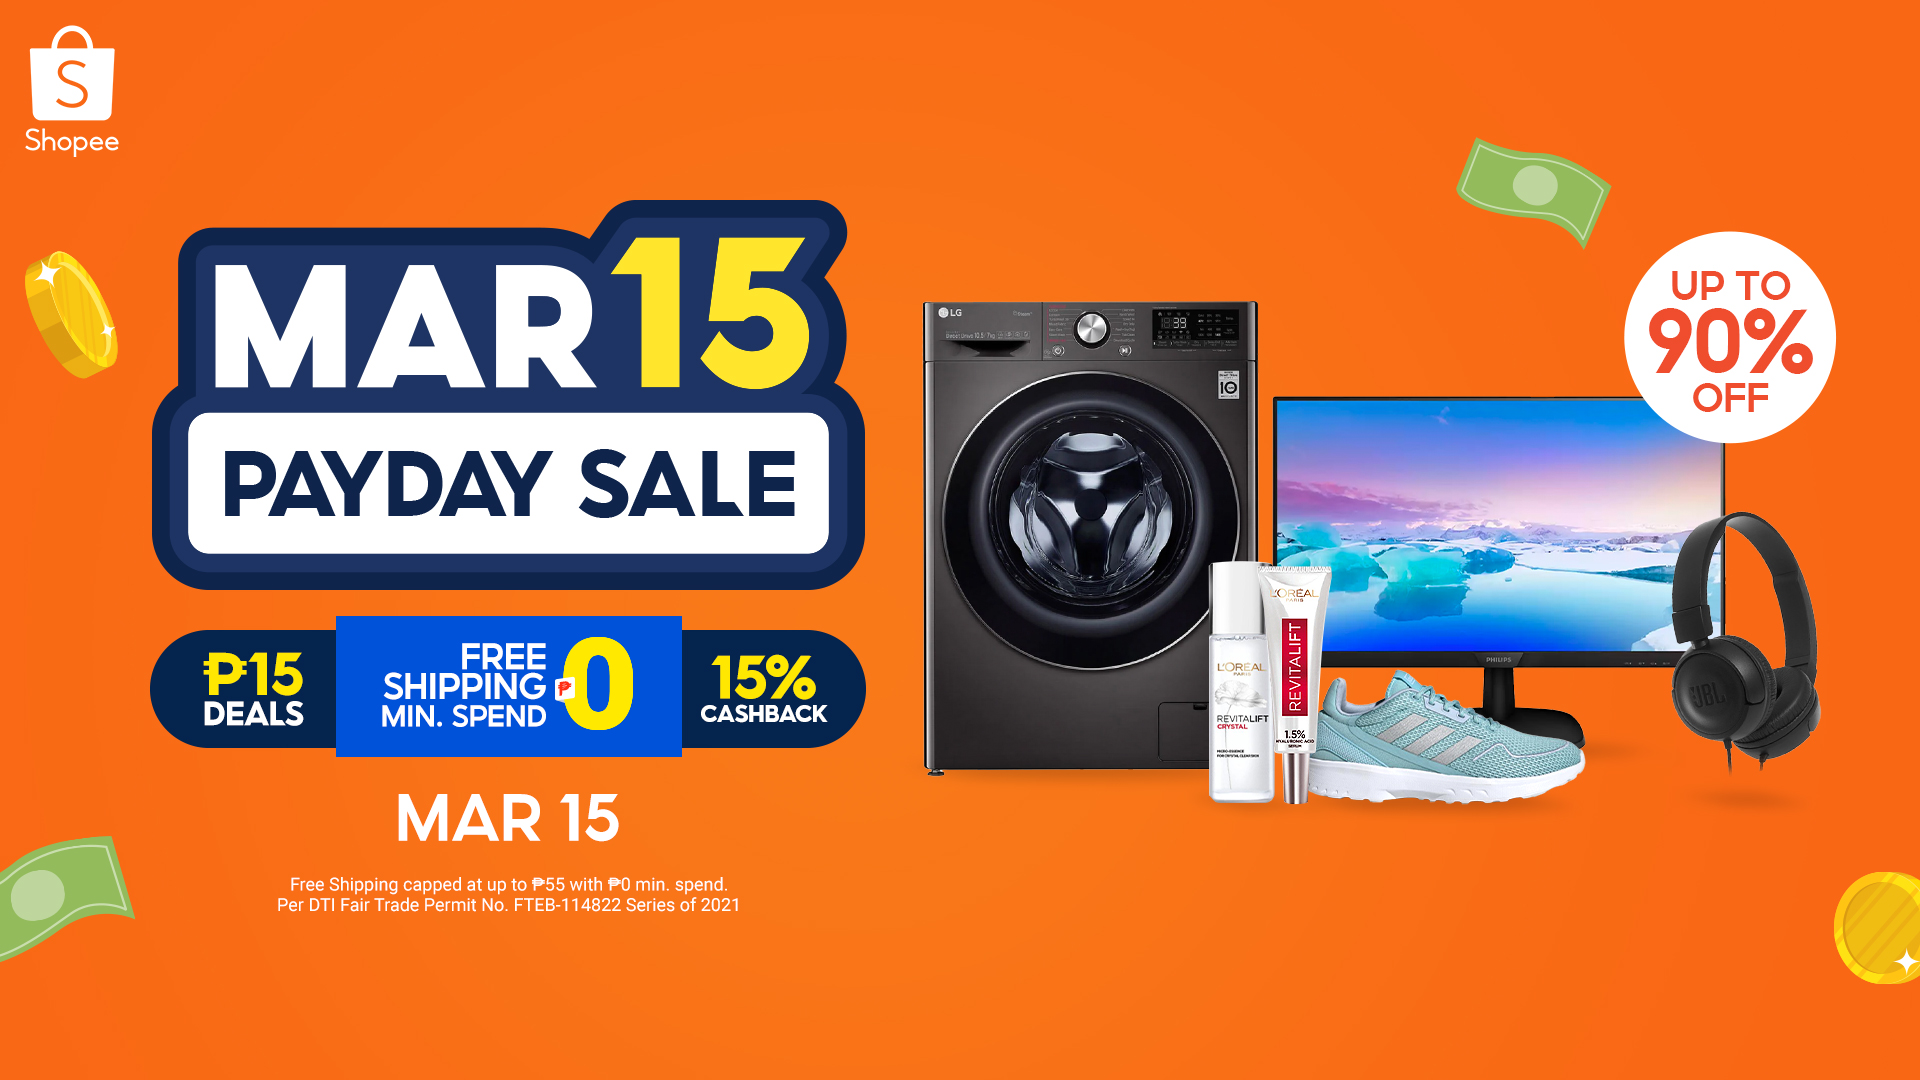 15 best deals you can find at Shopee’s 3.15 Payday Sale and enjoy discounts up to 90% off